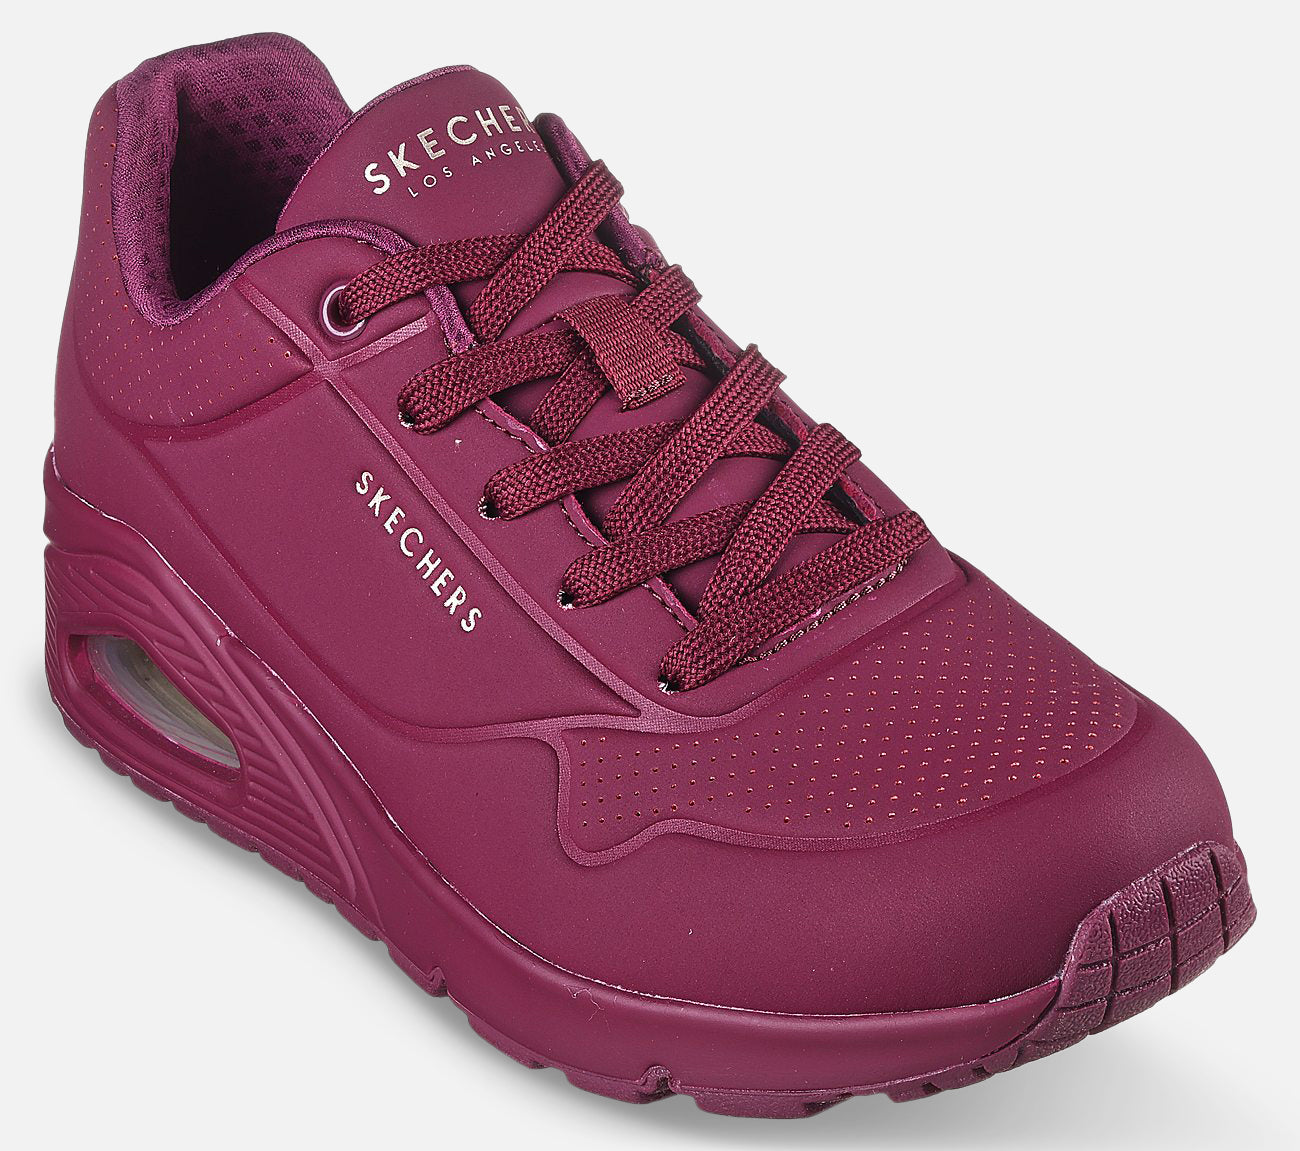 Uno - Stand On Air Shoe Skechers